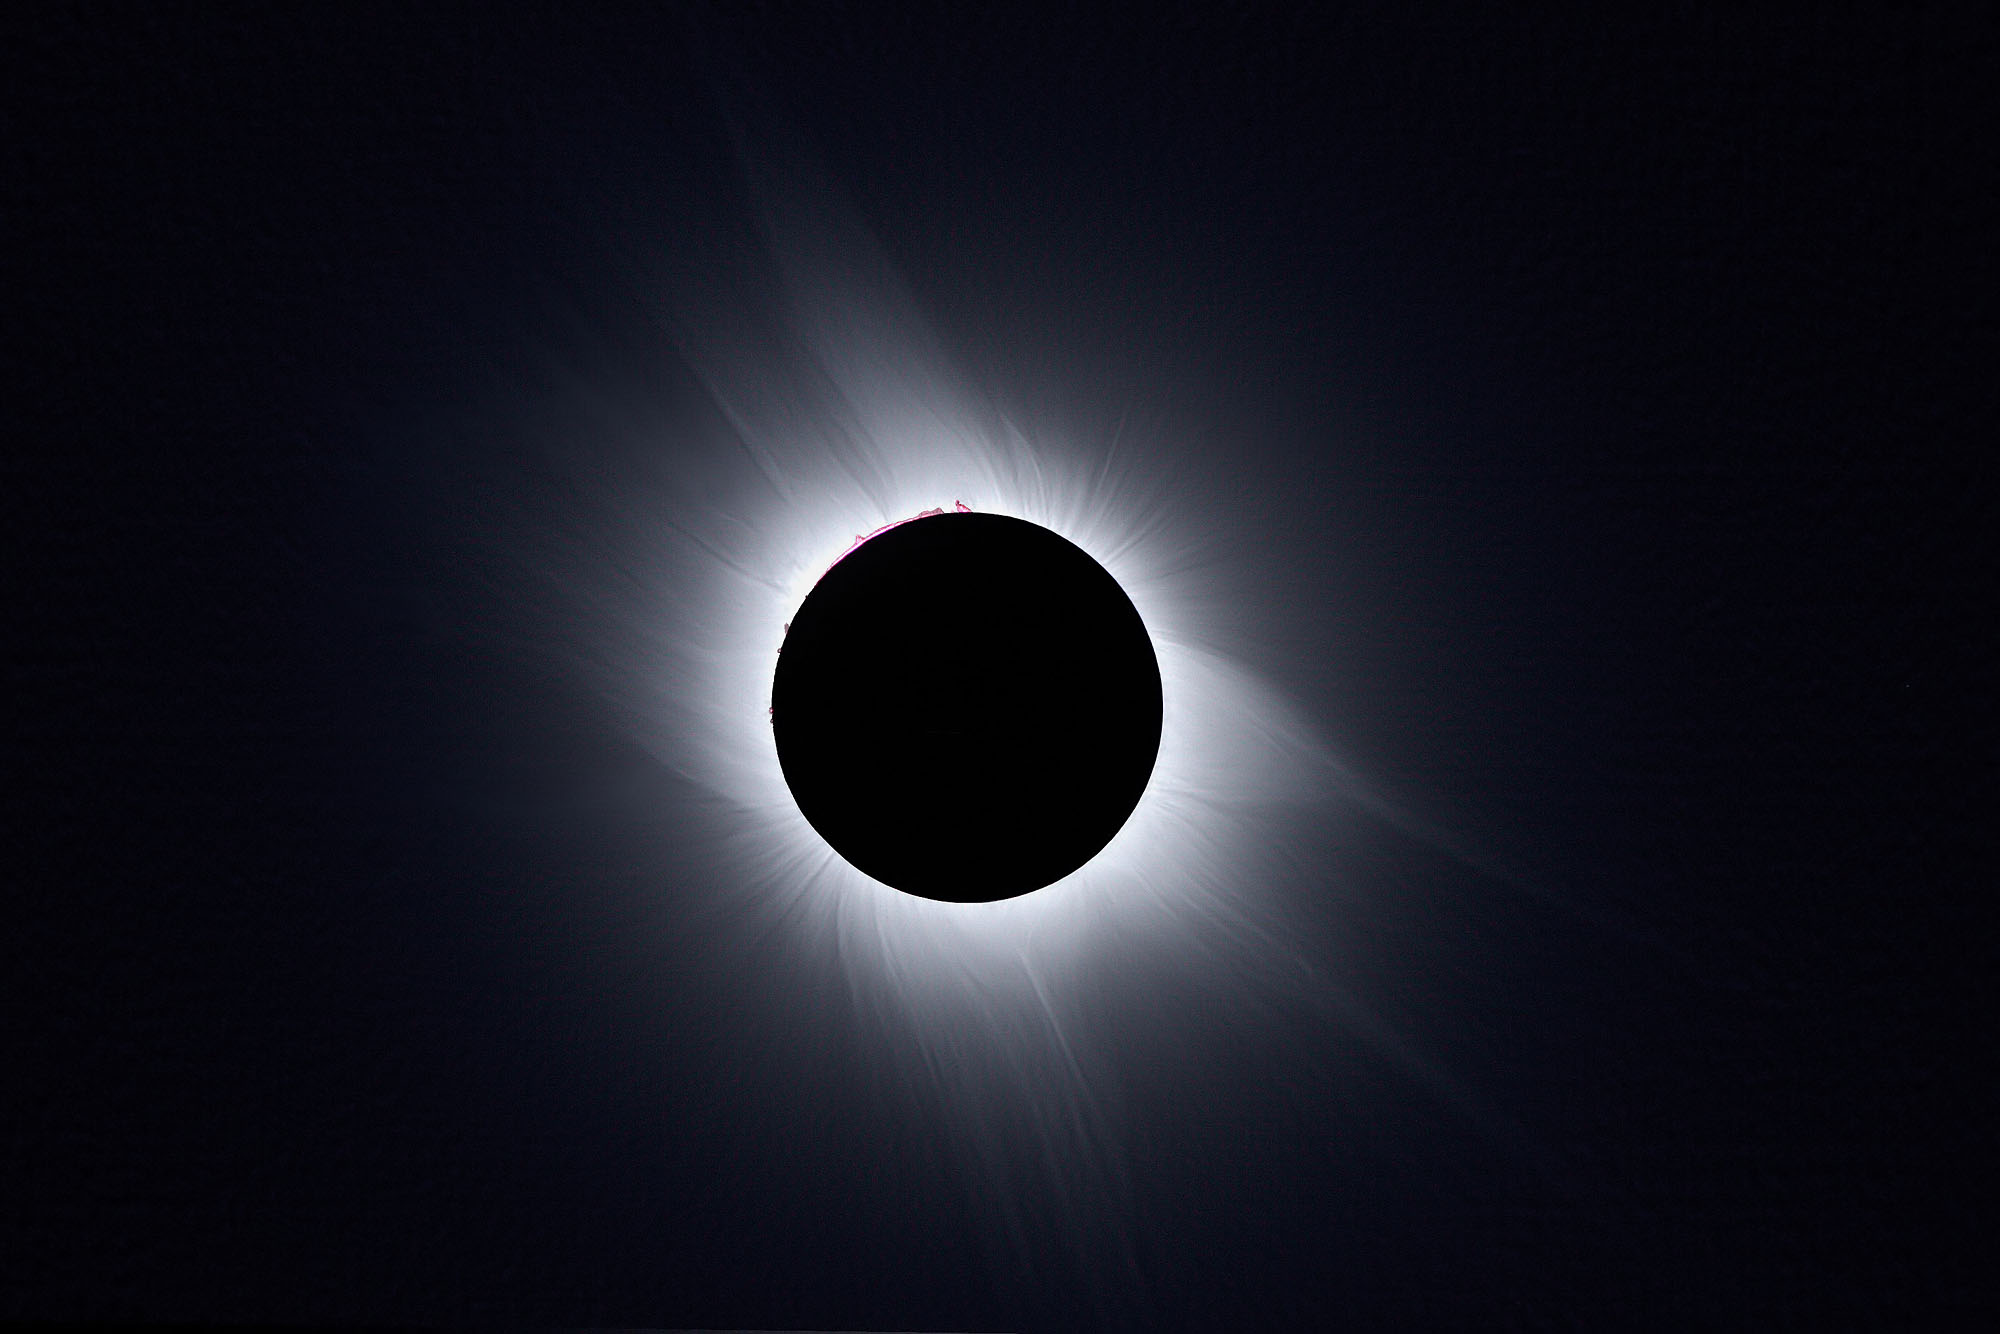 The full corona during the total solar eclipse of 2006 near Side in Turkey.